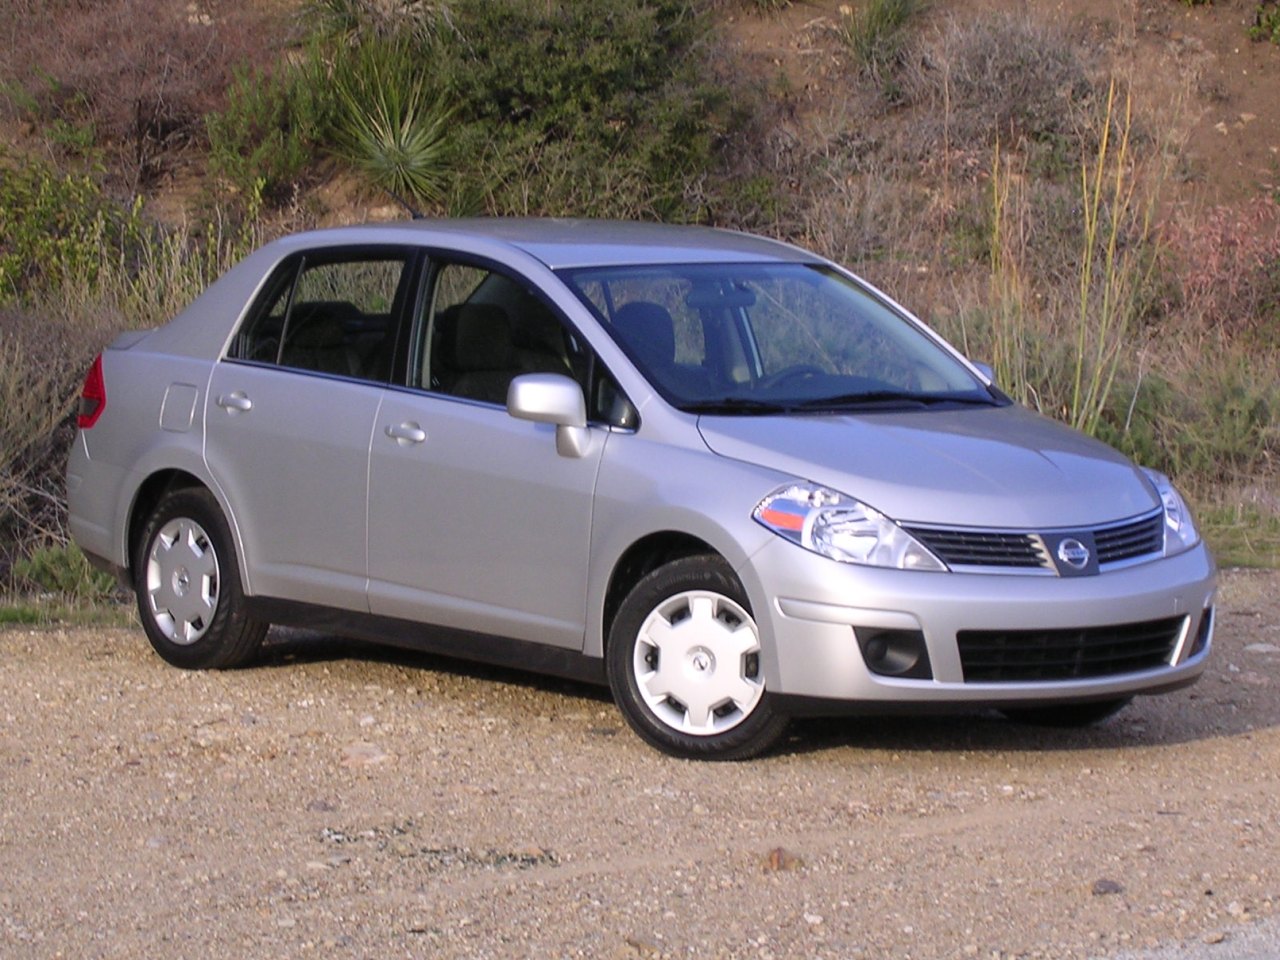 Nissan Versa Pictures Images title=